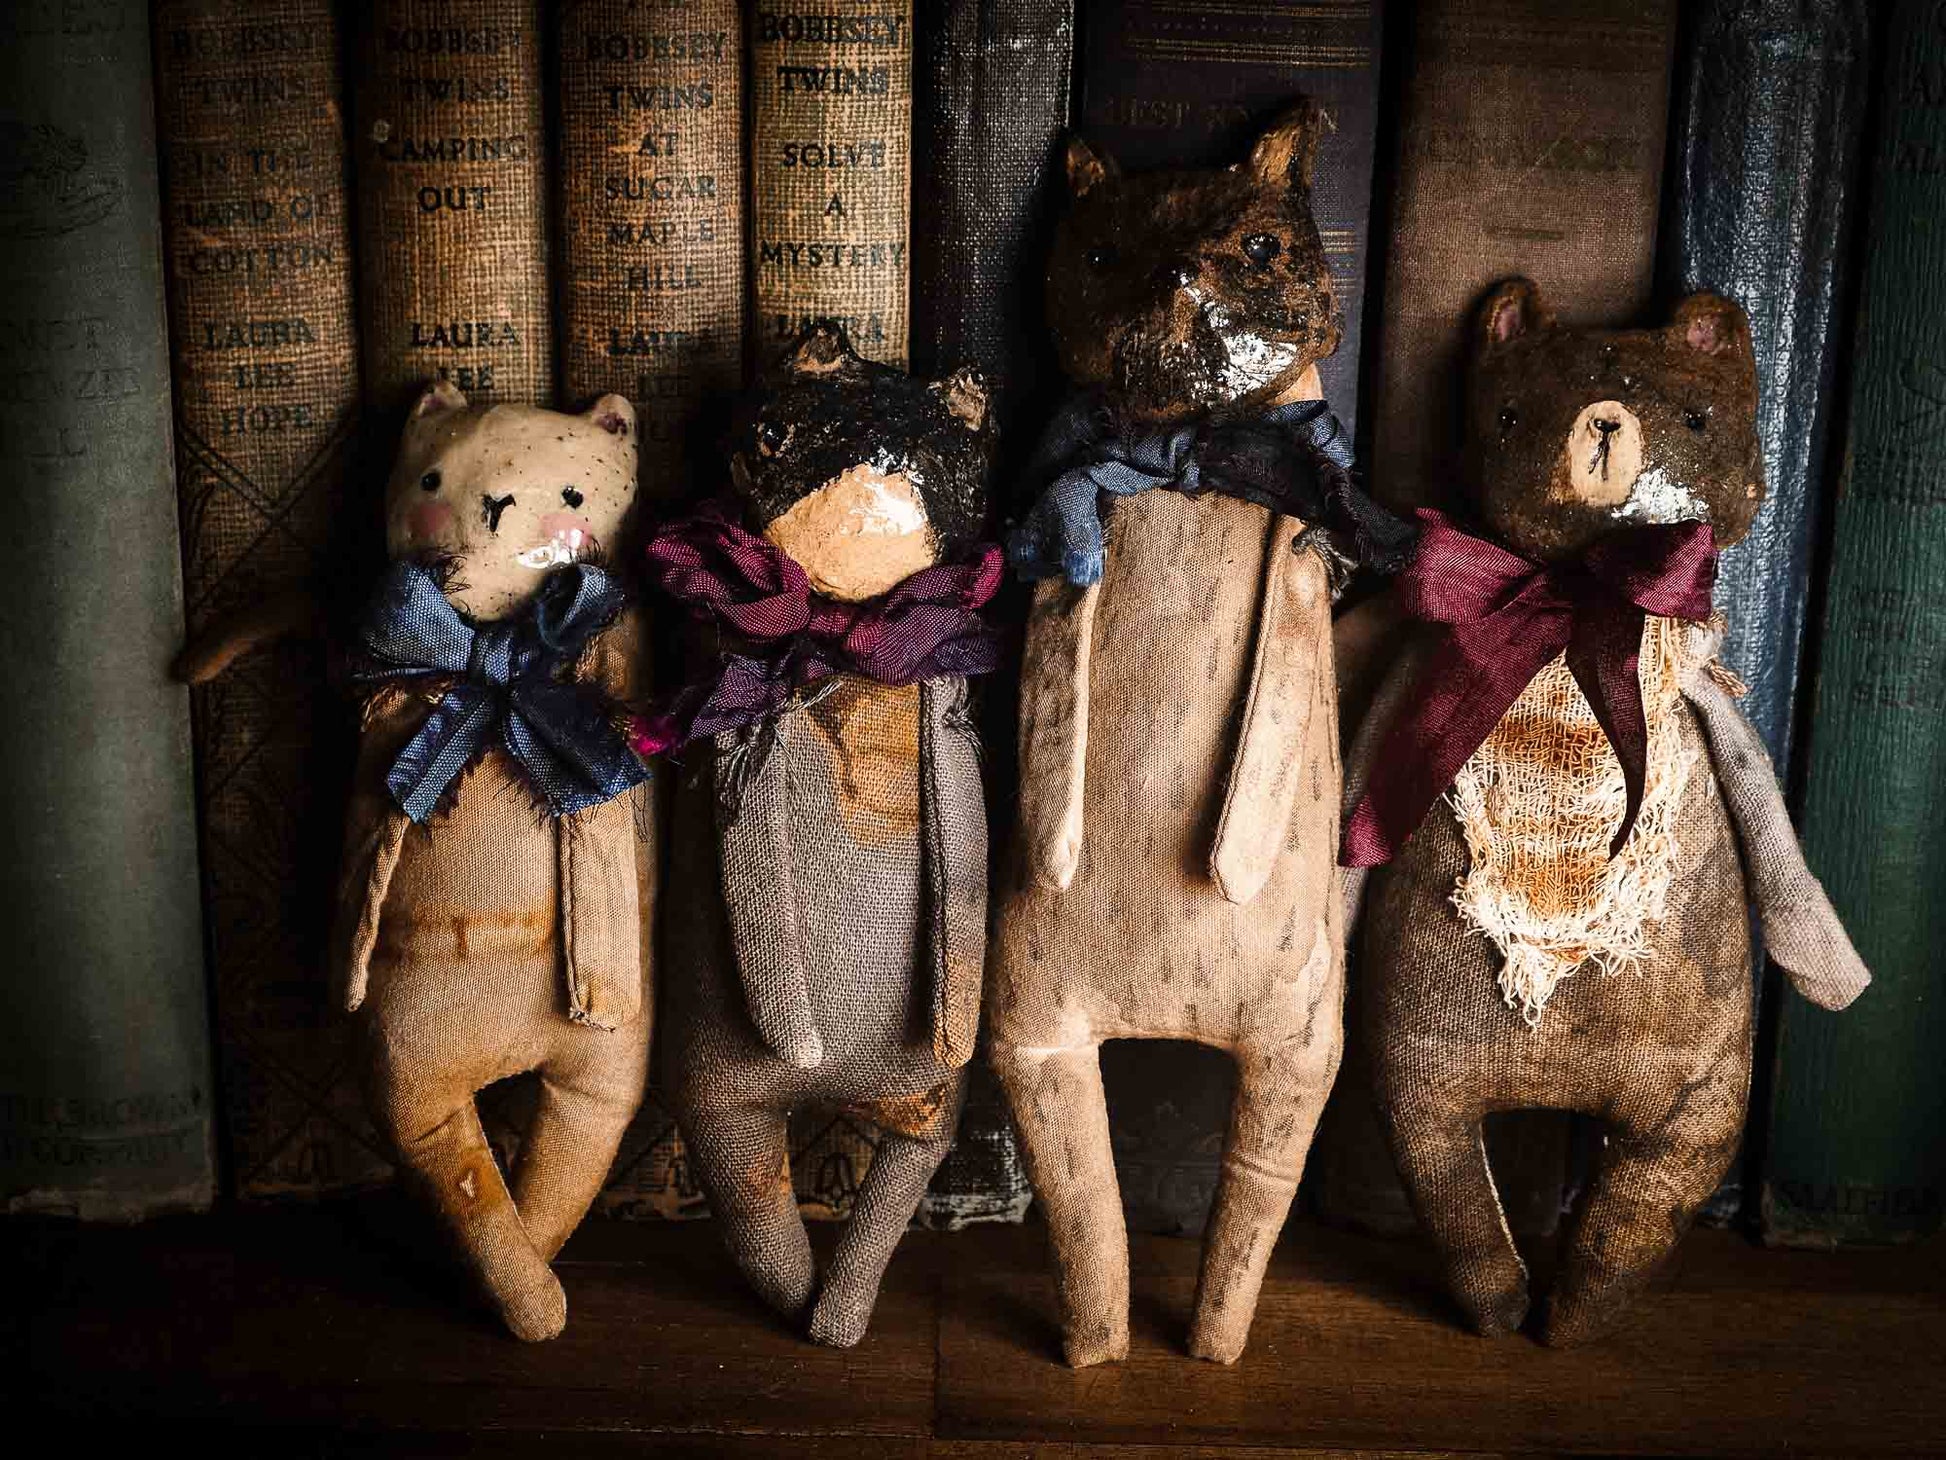 Woodlands Collection Of Unique Soft sculpture art doll by Idania Salcido Danita Art with a Handmade ceramics face, organic dyed fabric and silk bows